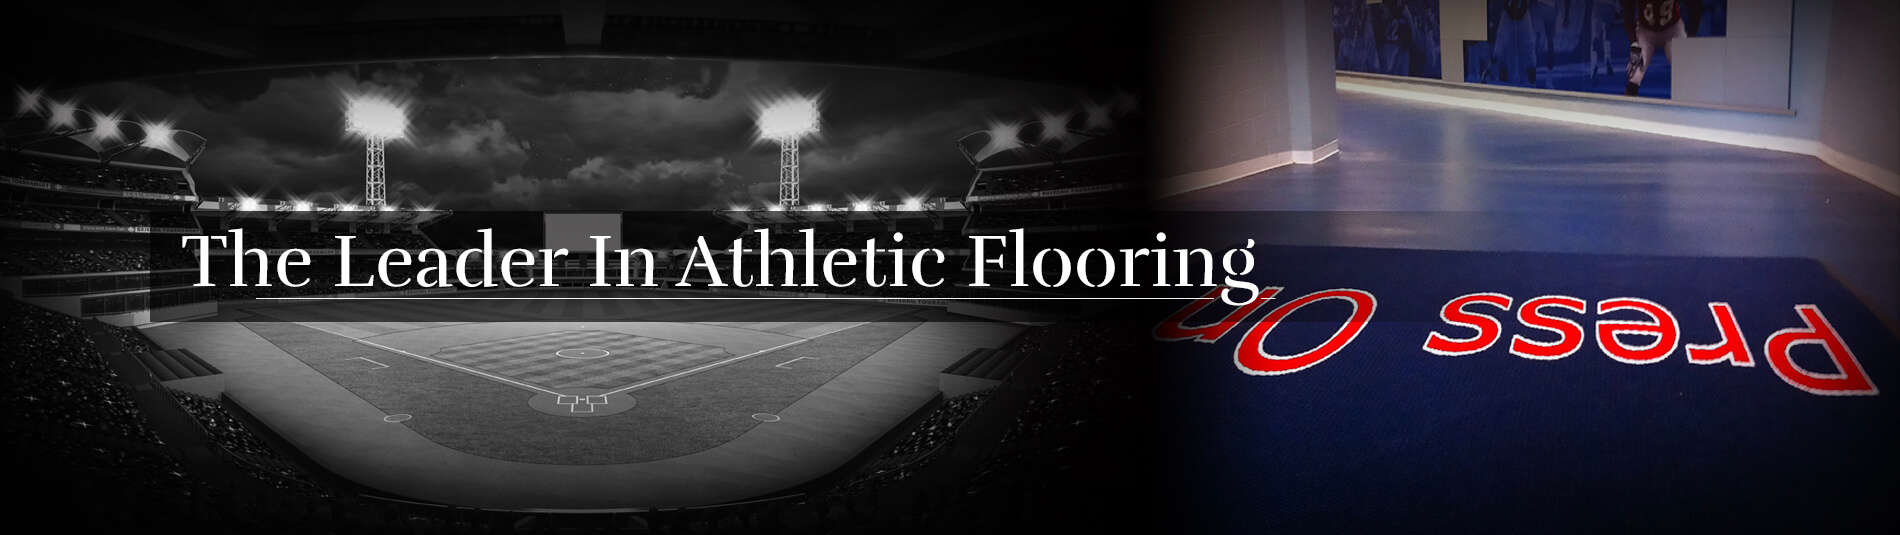 The Leader in Athletic Flooring banner